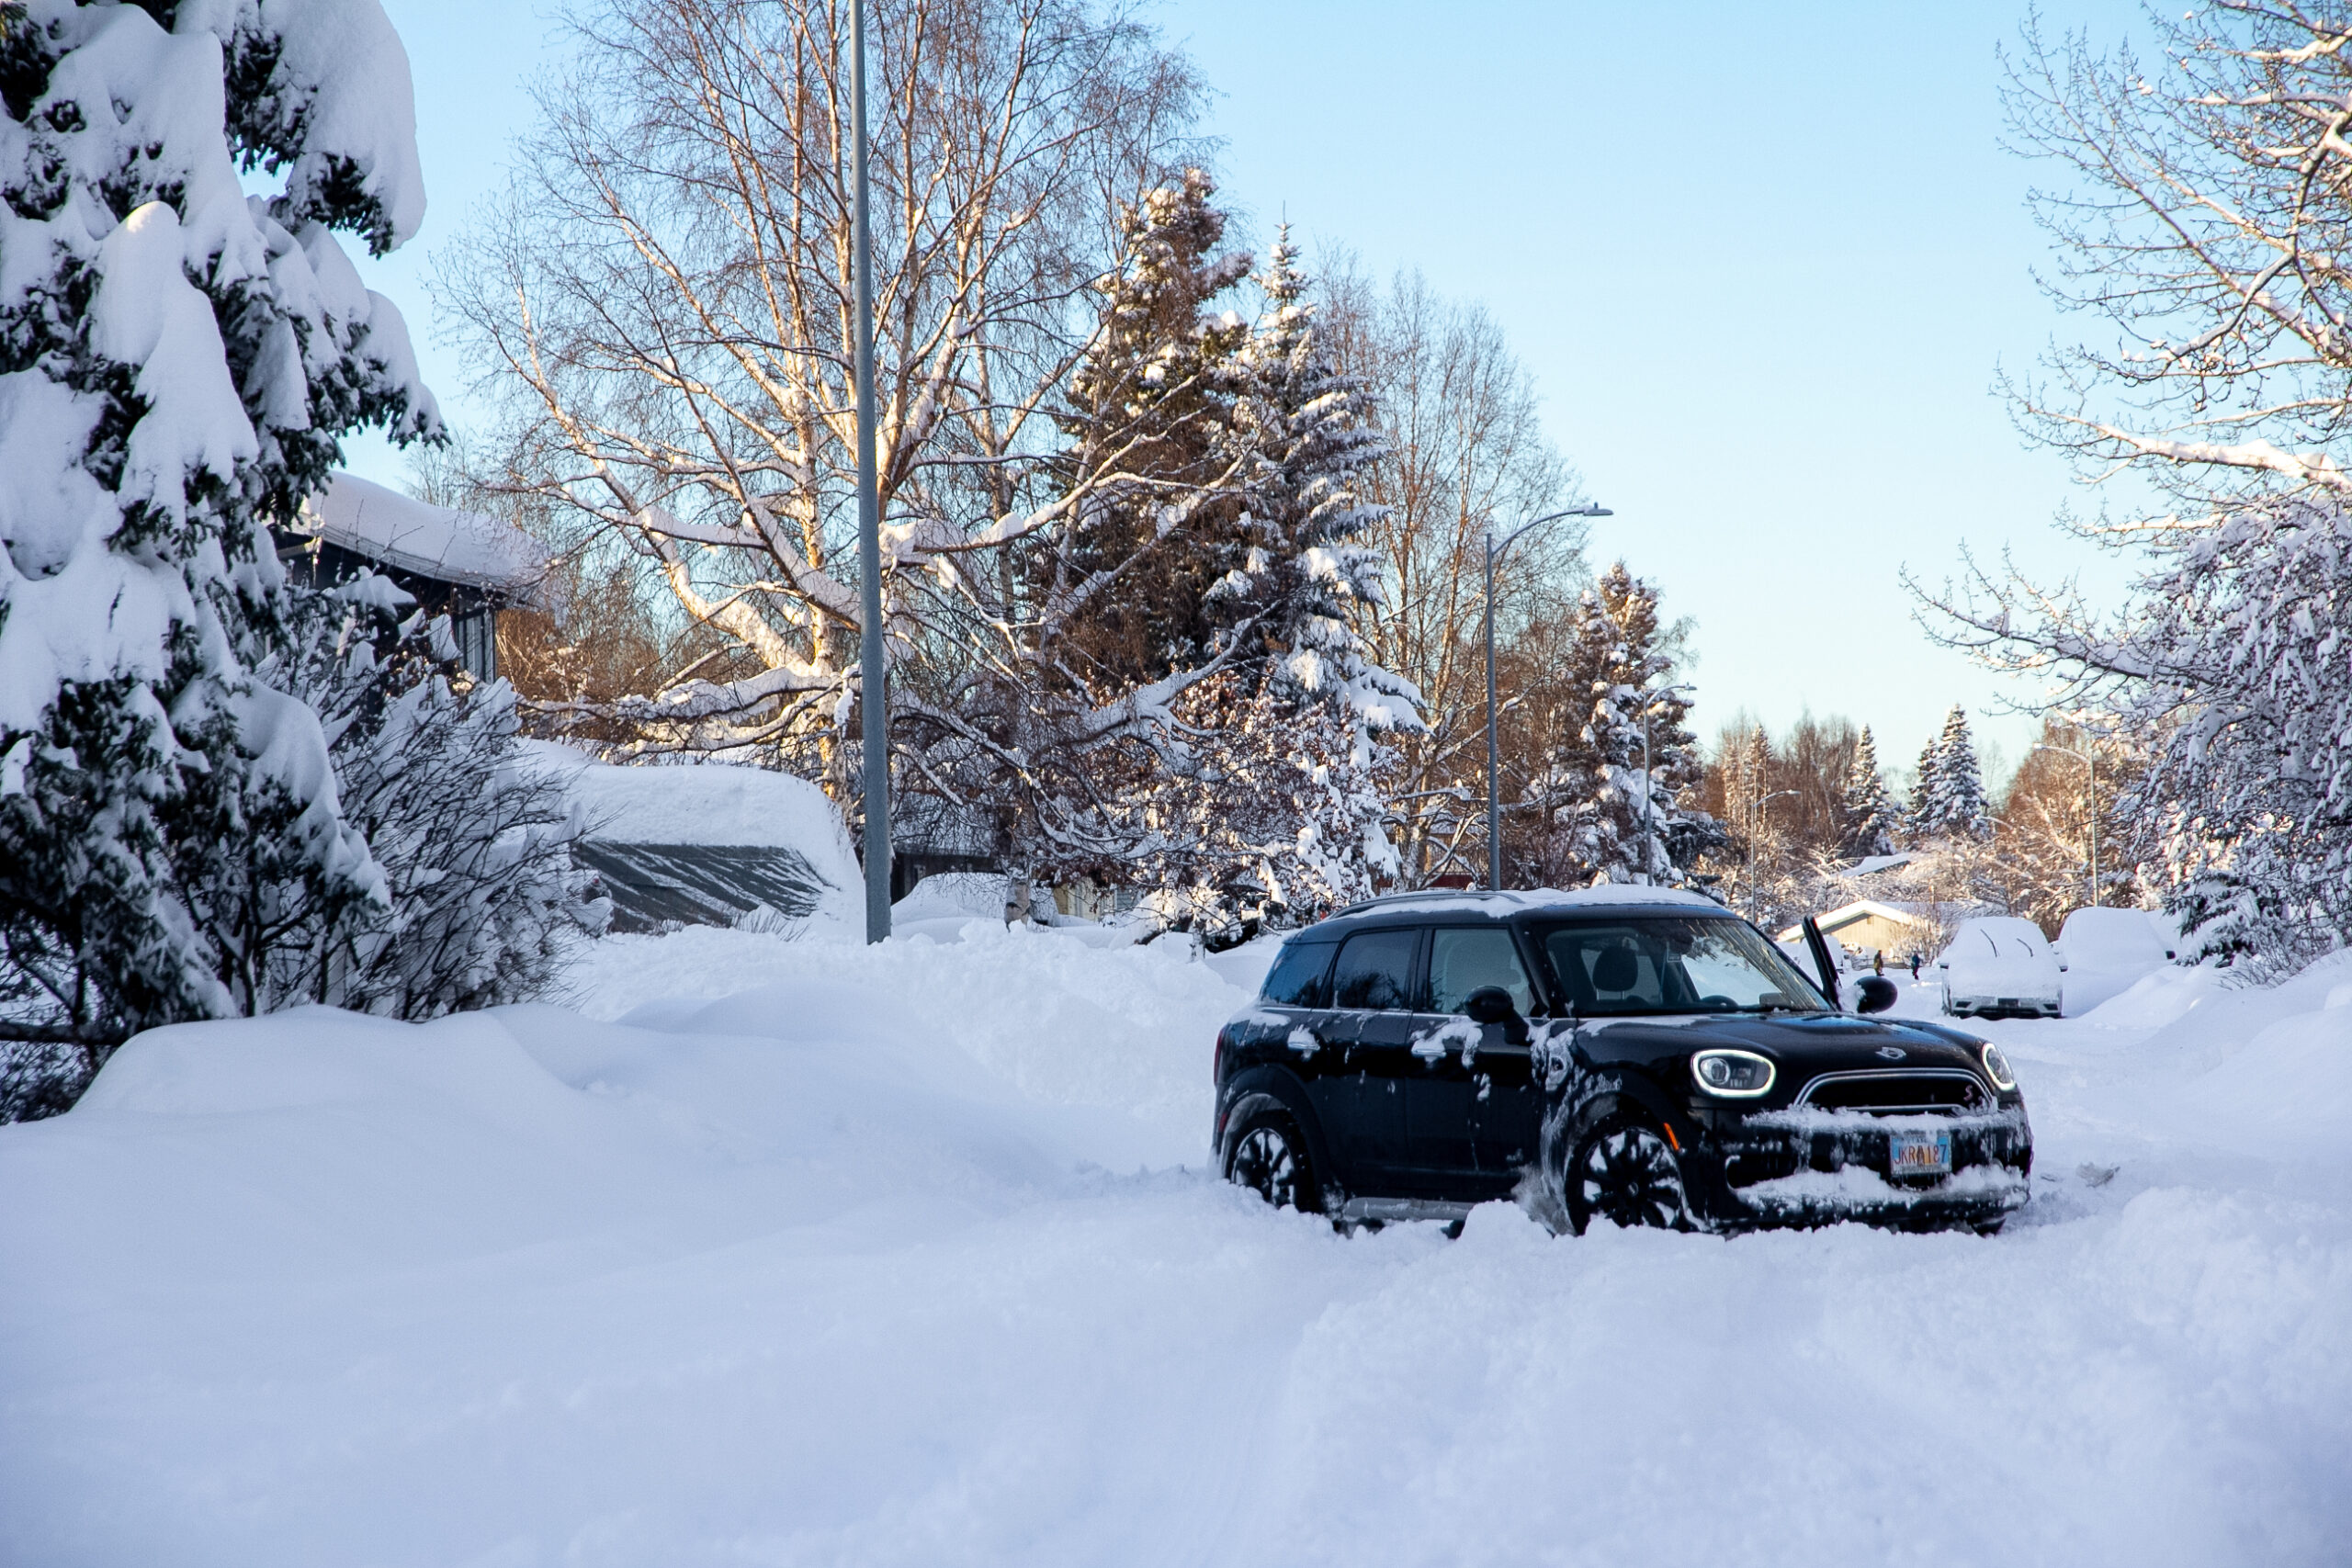 A Mini Cooper sits stuck in snow in the middle of a residential road.